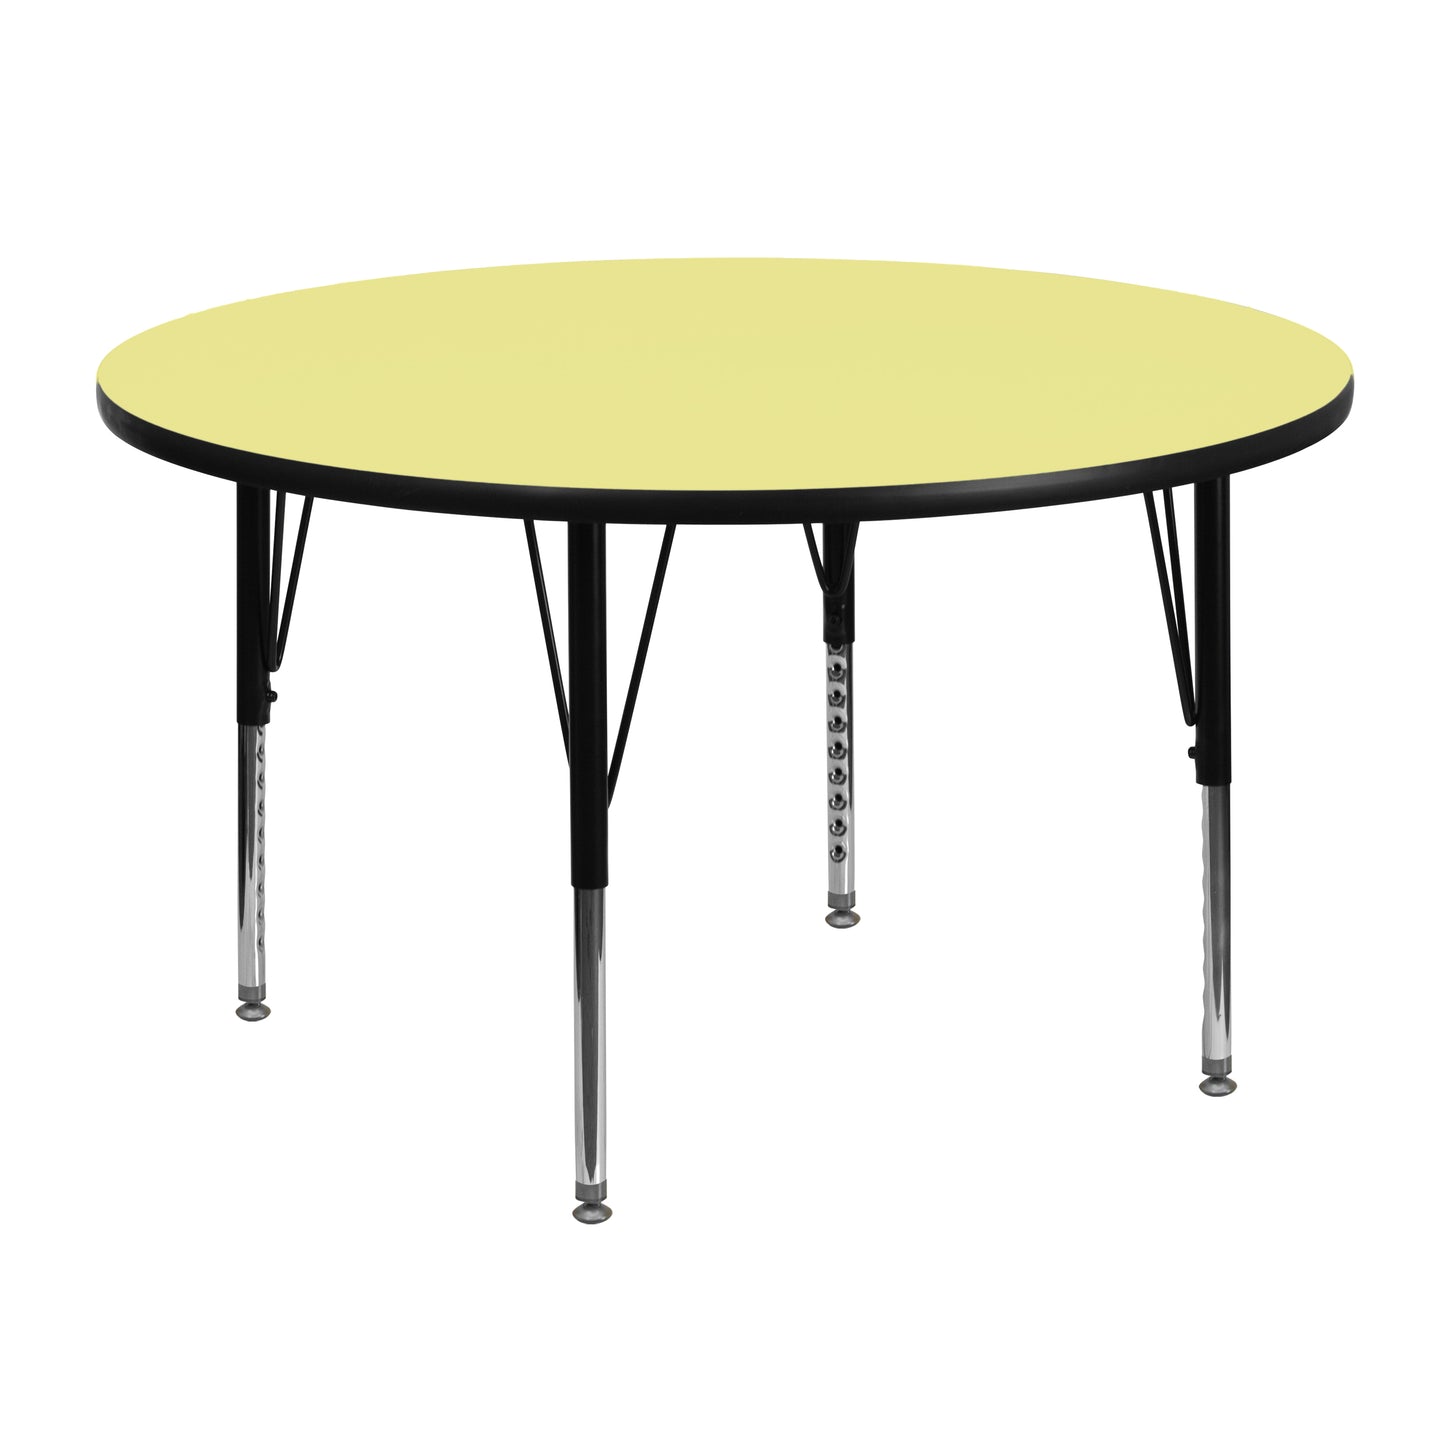 Wren Mobile 48'' Round Thermal Laminate Activity Table - Standard Height Adjustable Legs